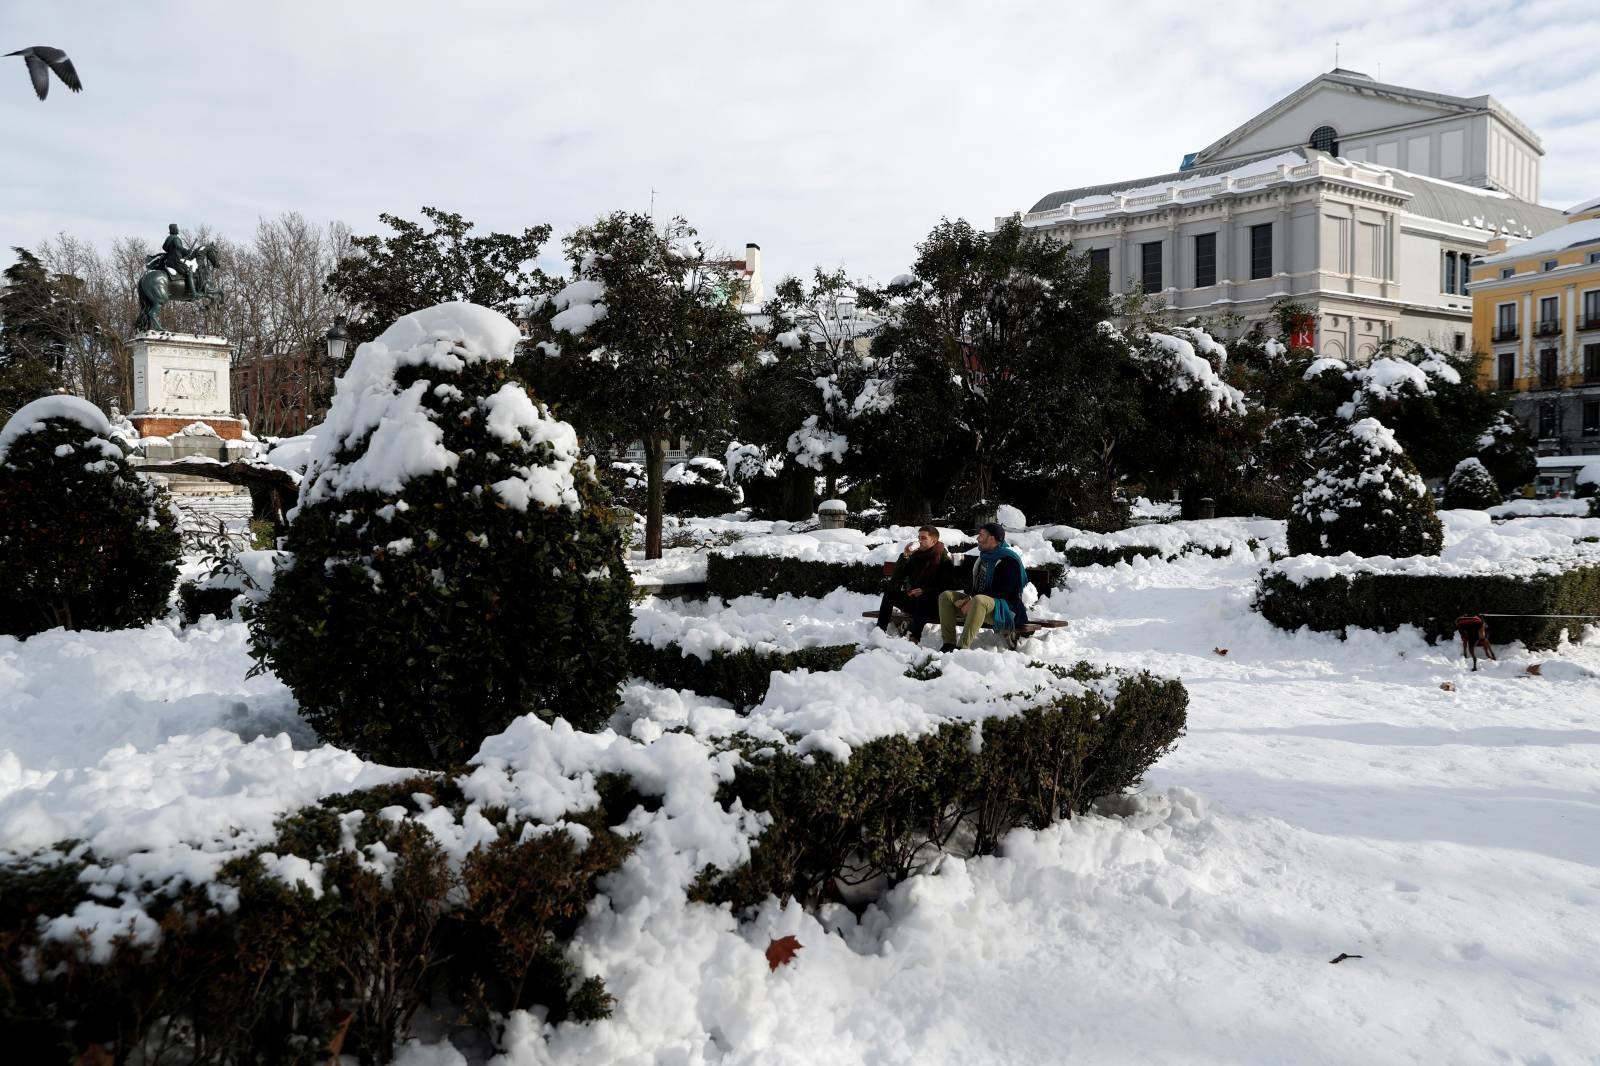 Men sit on a bench in a snow-covered square with the Royal Theatre in the background, in Madrid